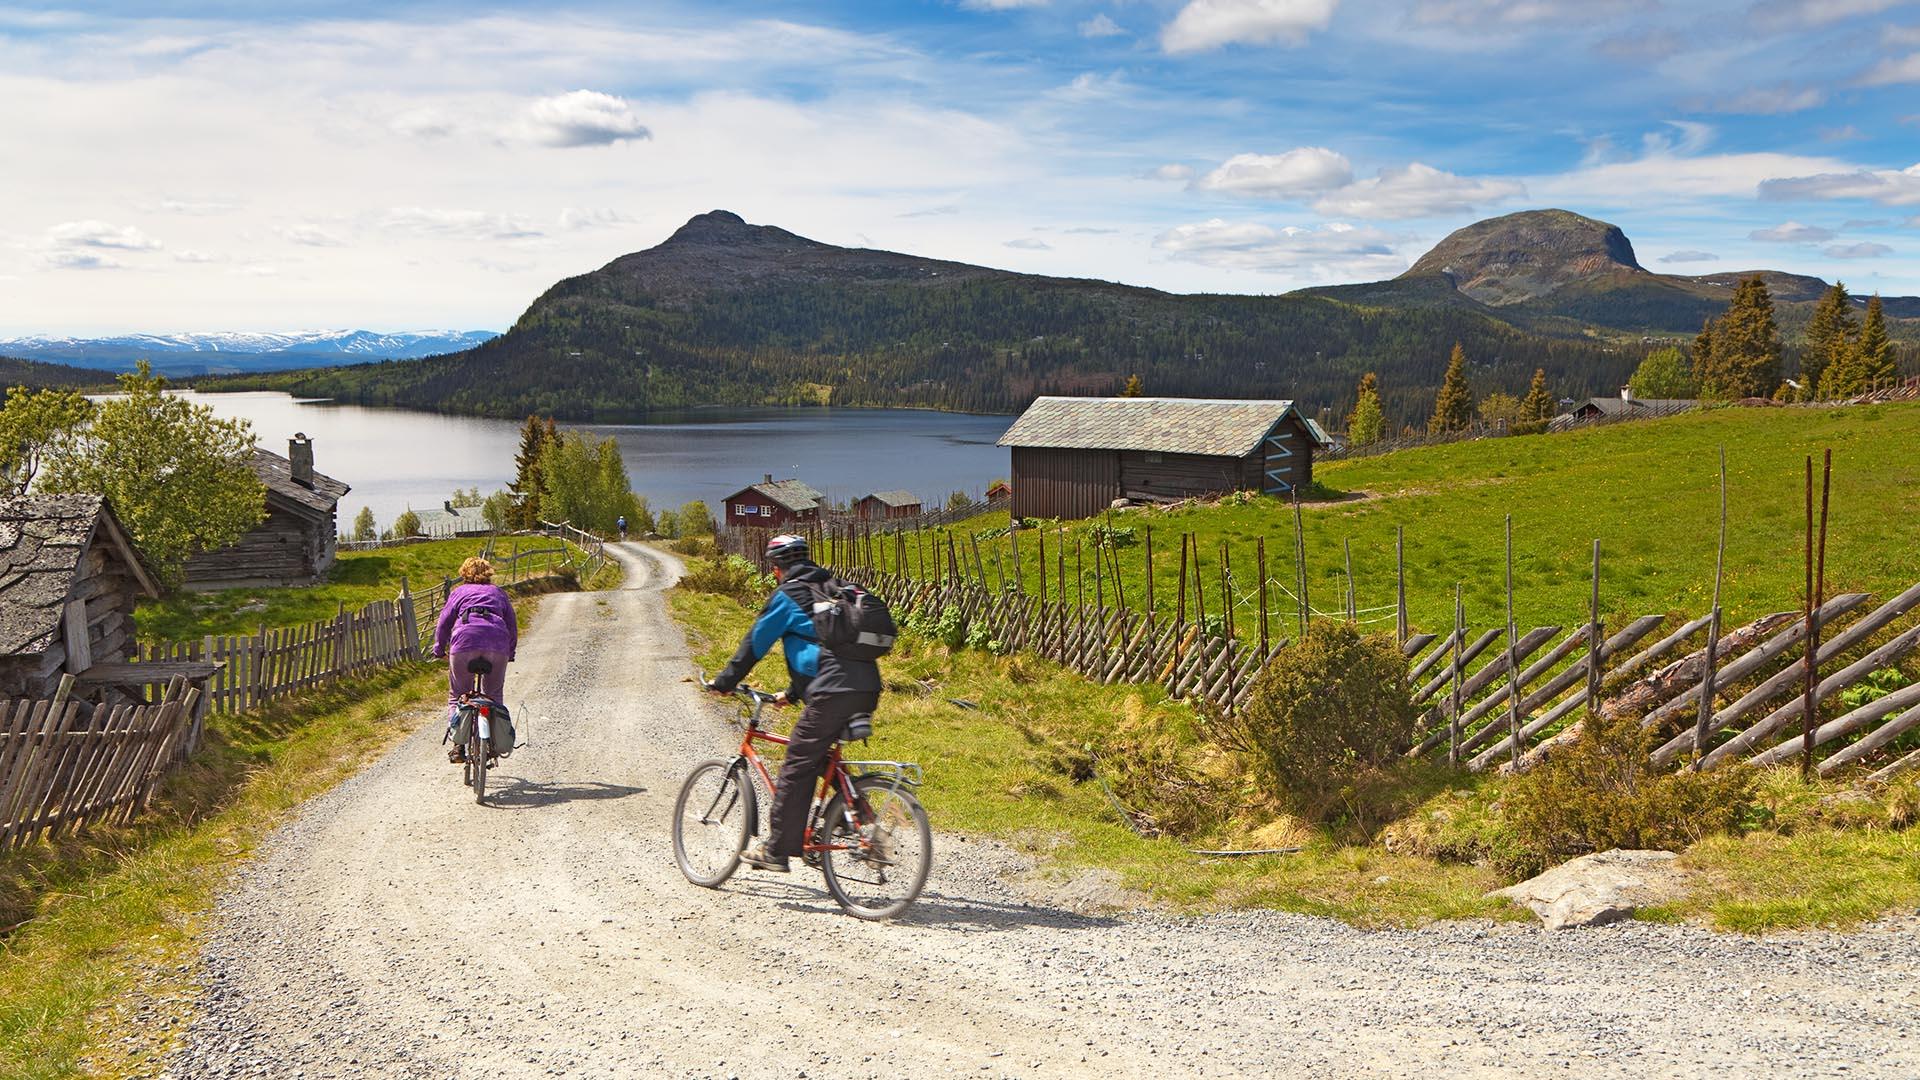 Two cyclists cycle on a gravel road that leads downhill towards a lake in beautiful surroundings with green mountain meadows, a cabin and mountains behind the lake.